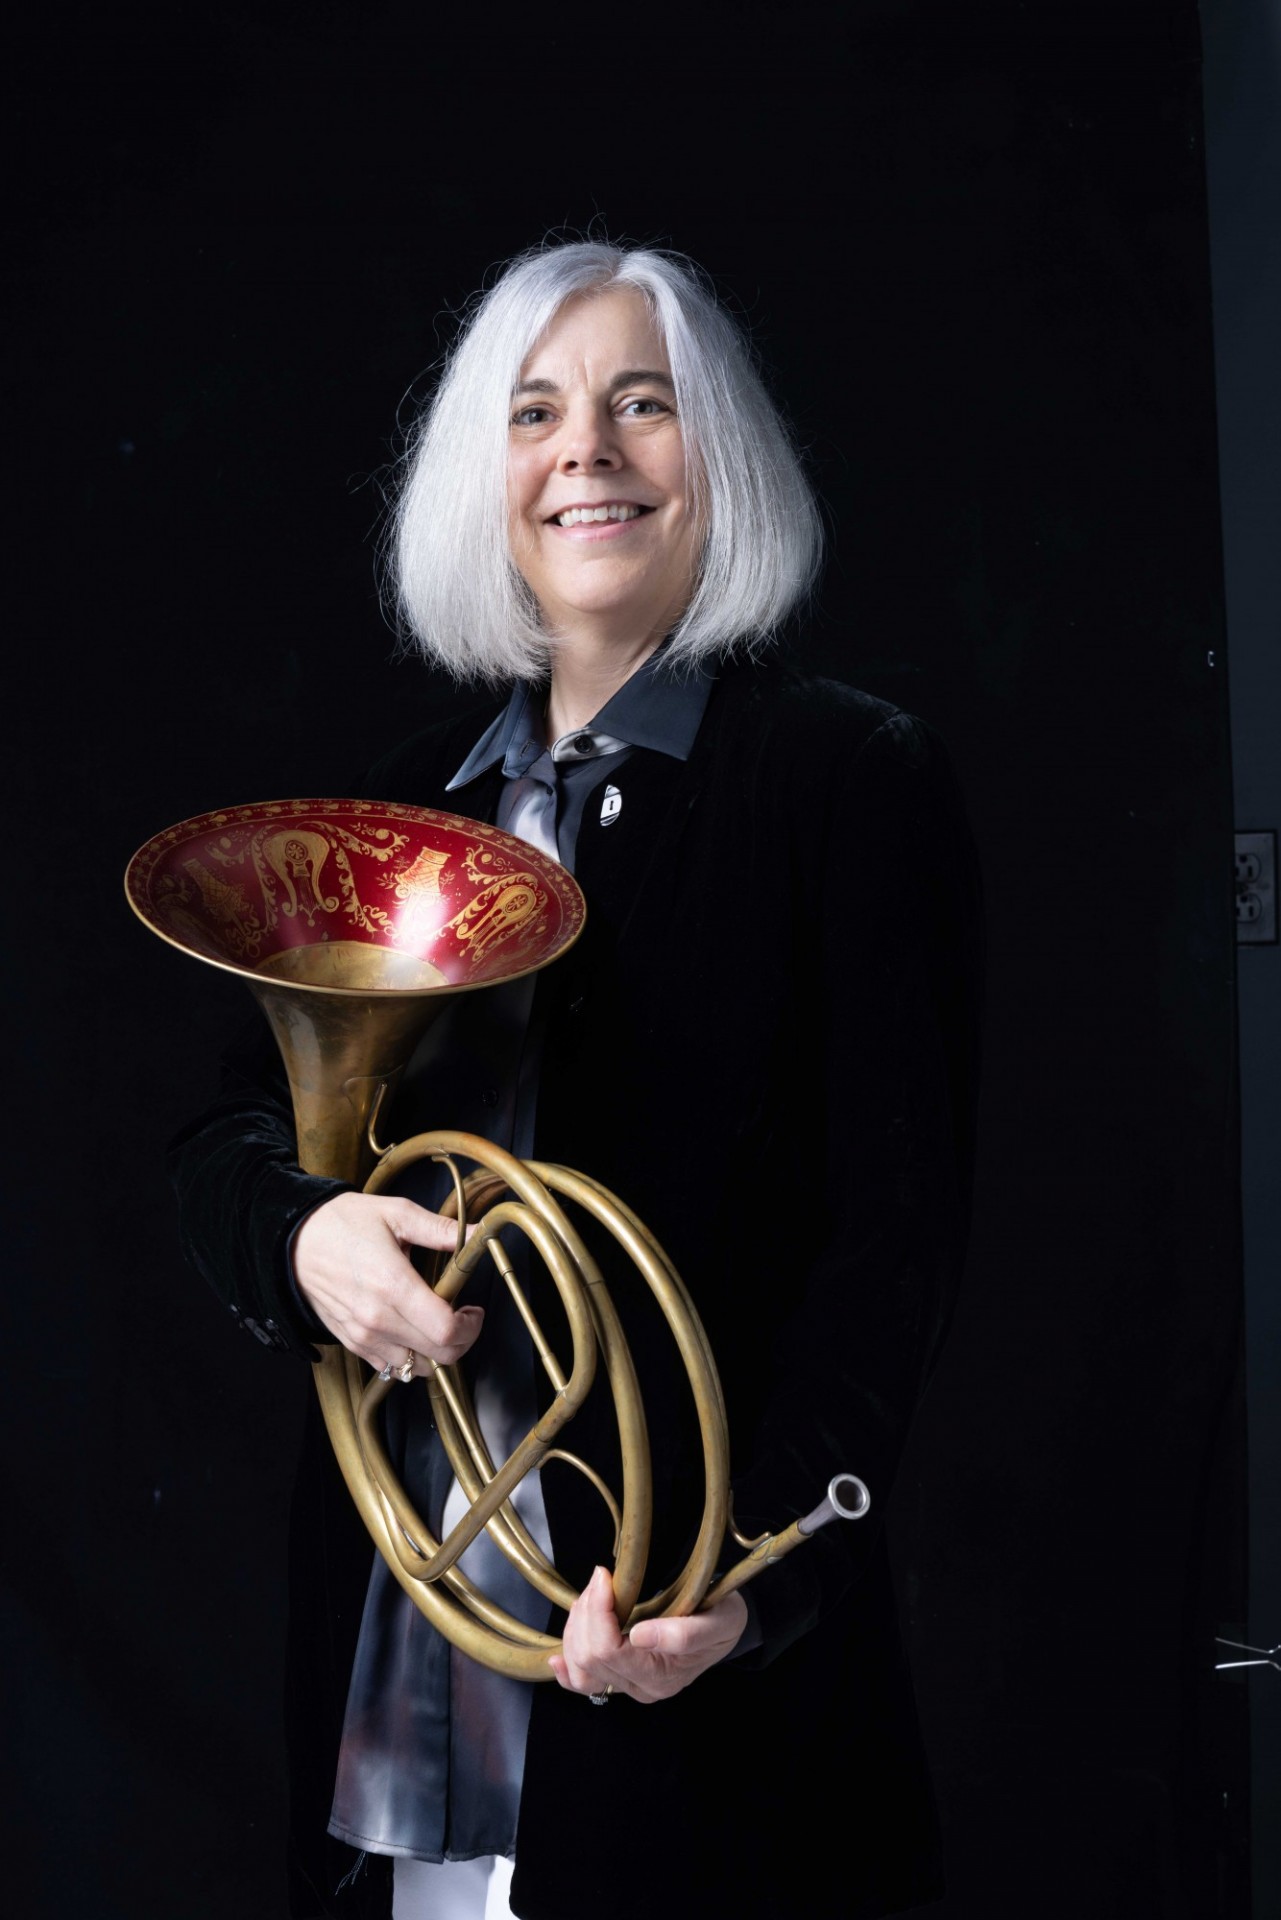 Dr. Strauchen-Scherer holding a French horn. The inside of the bell is embossed with a red design. She is on a black background.